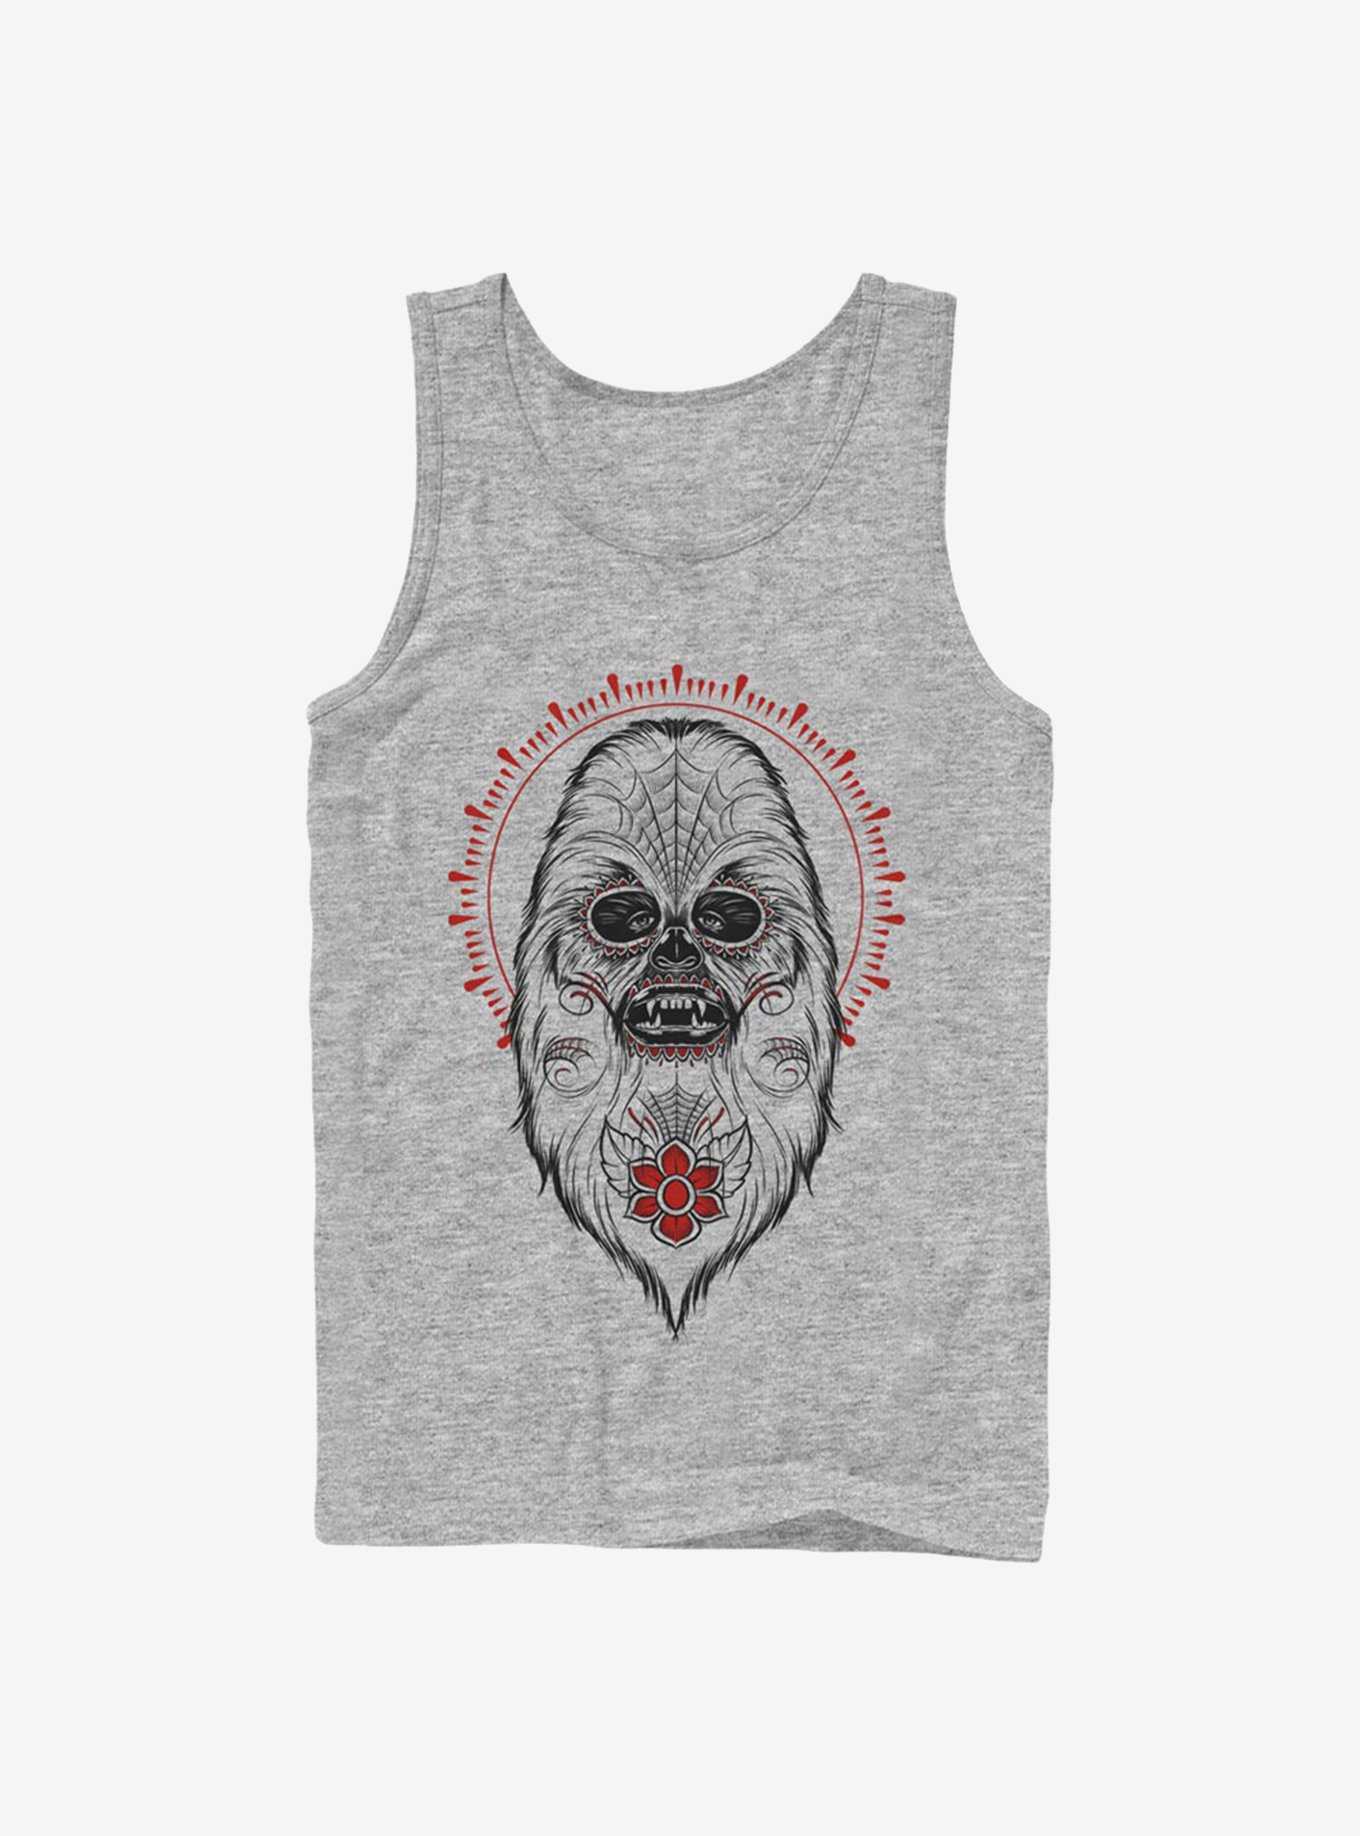 Star Wars Day Of The Dead Chewbacca Tank, , hi-res